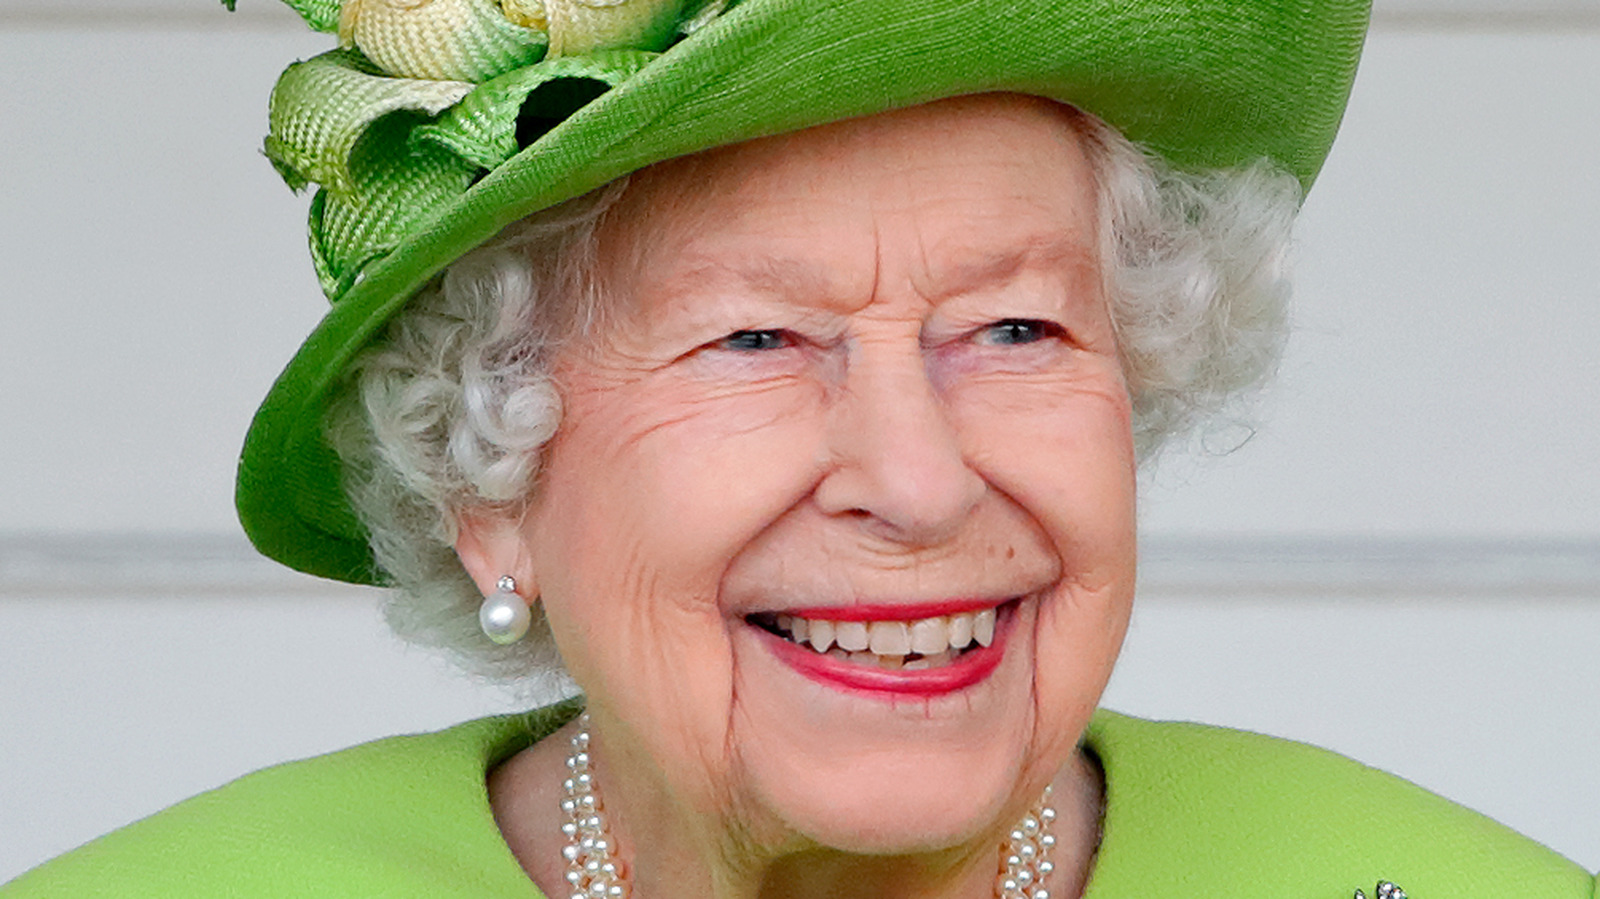 The Queen’s Perfumer Released A Special Scent For Her Platinum Jubilee. Here’s What It Smells Like